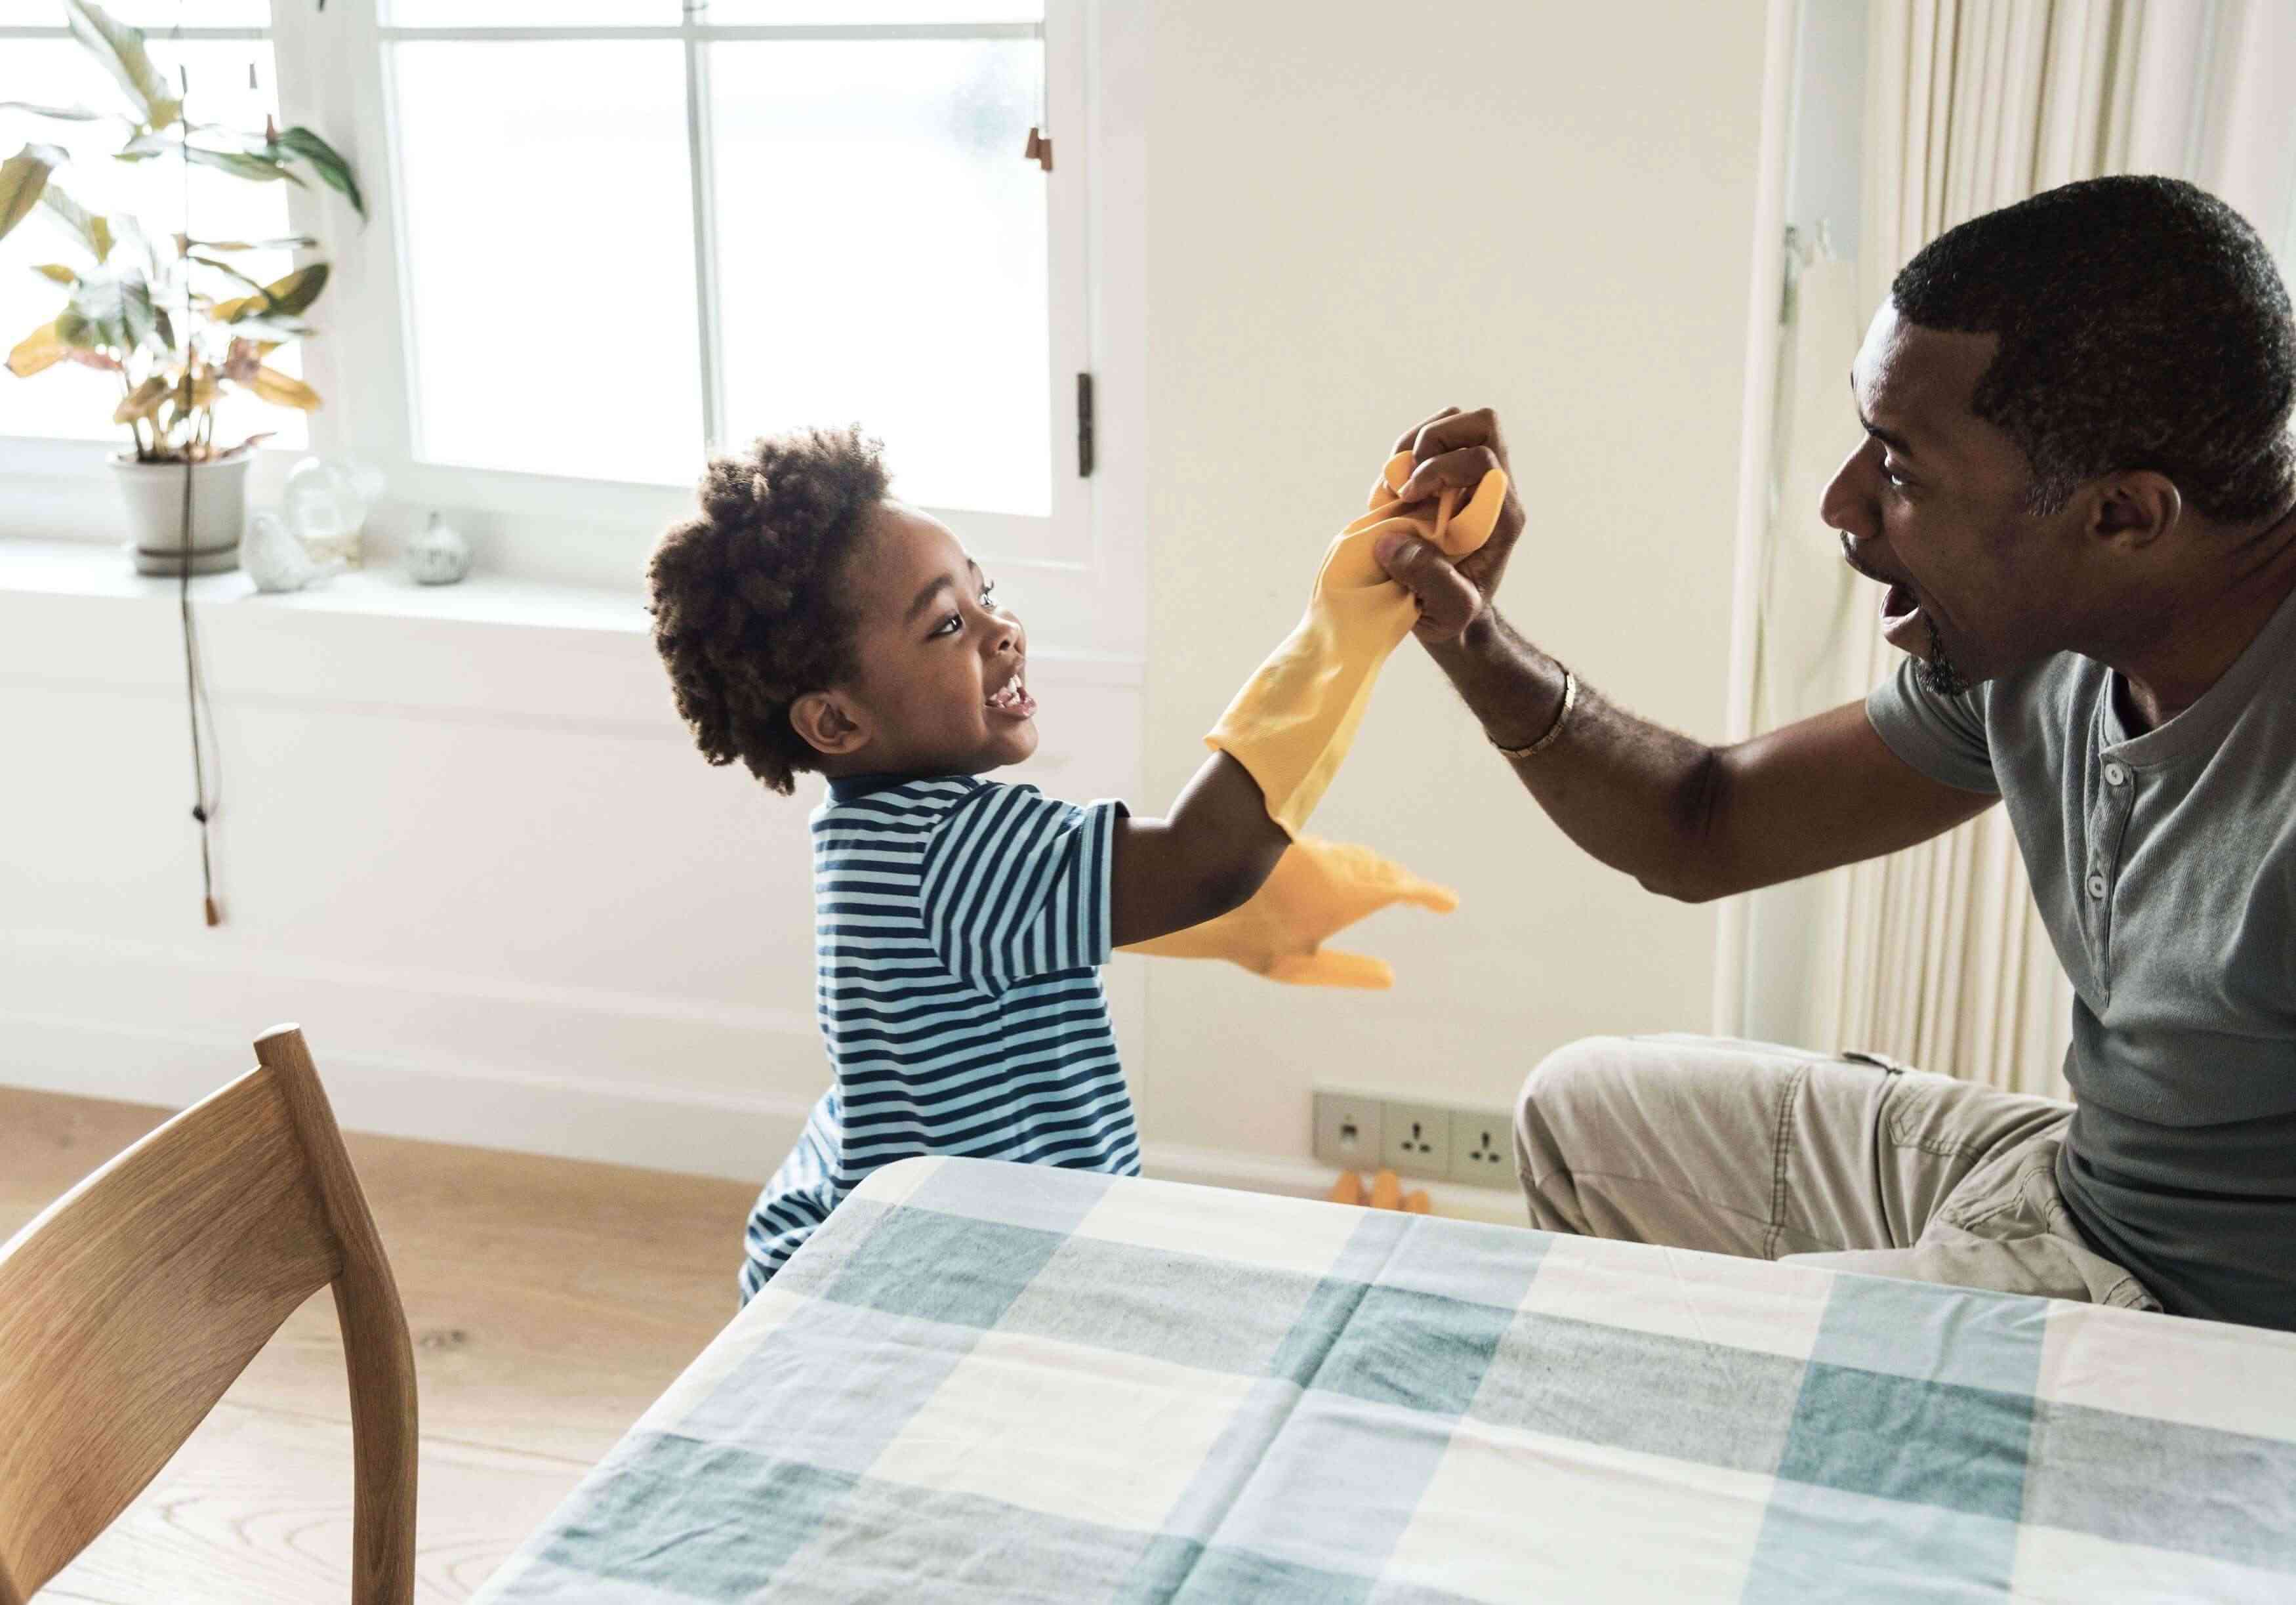 A dad high fives his young son who is wearing a large cleaning glove as he teaches his child how to do chores.